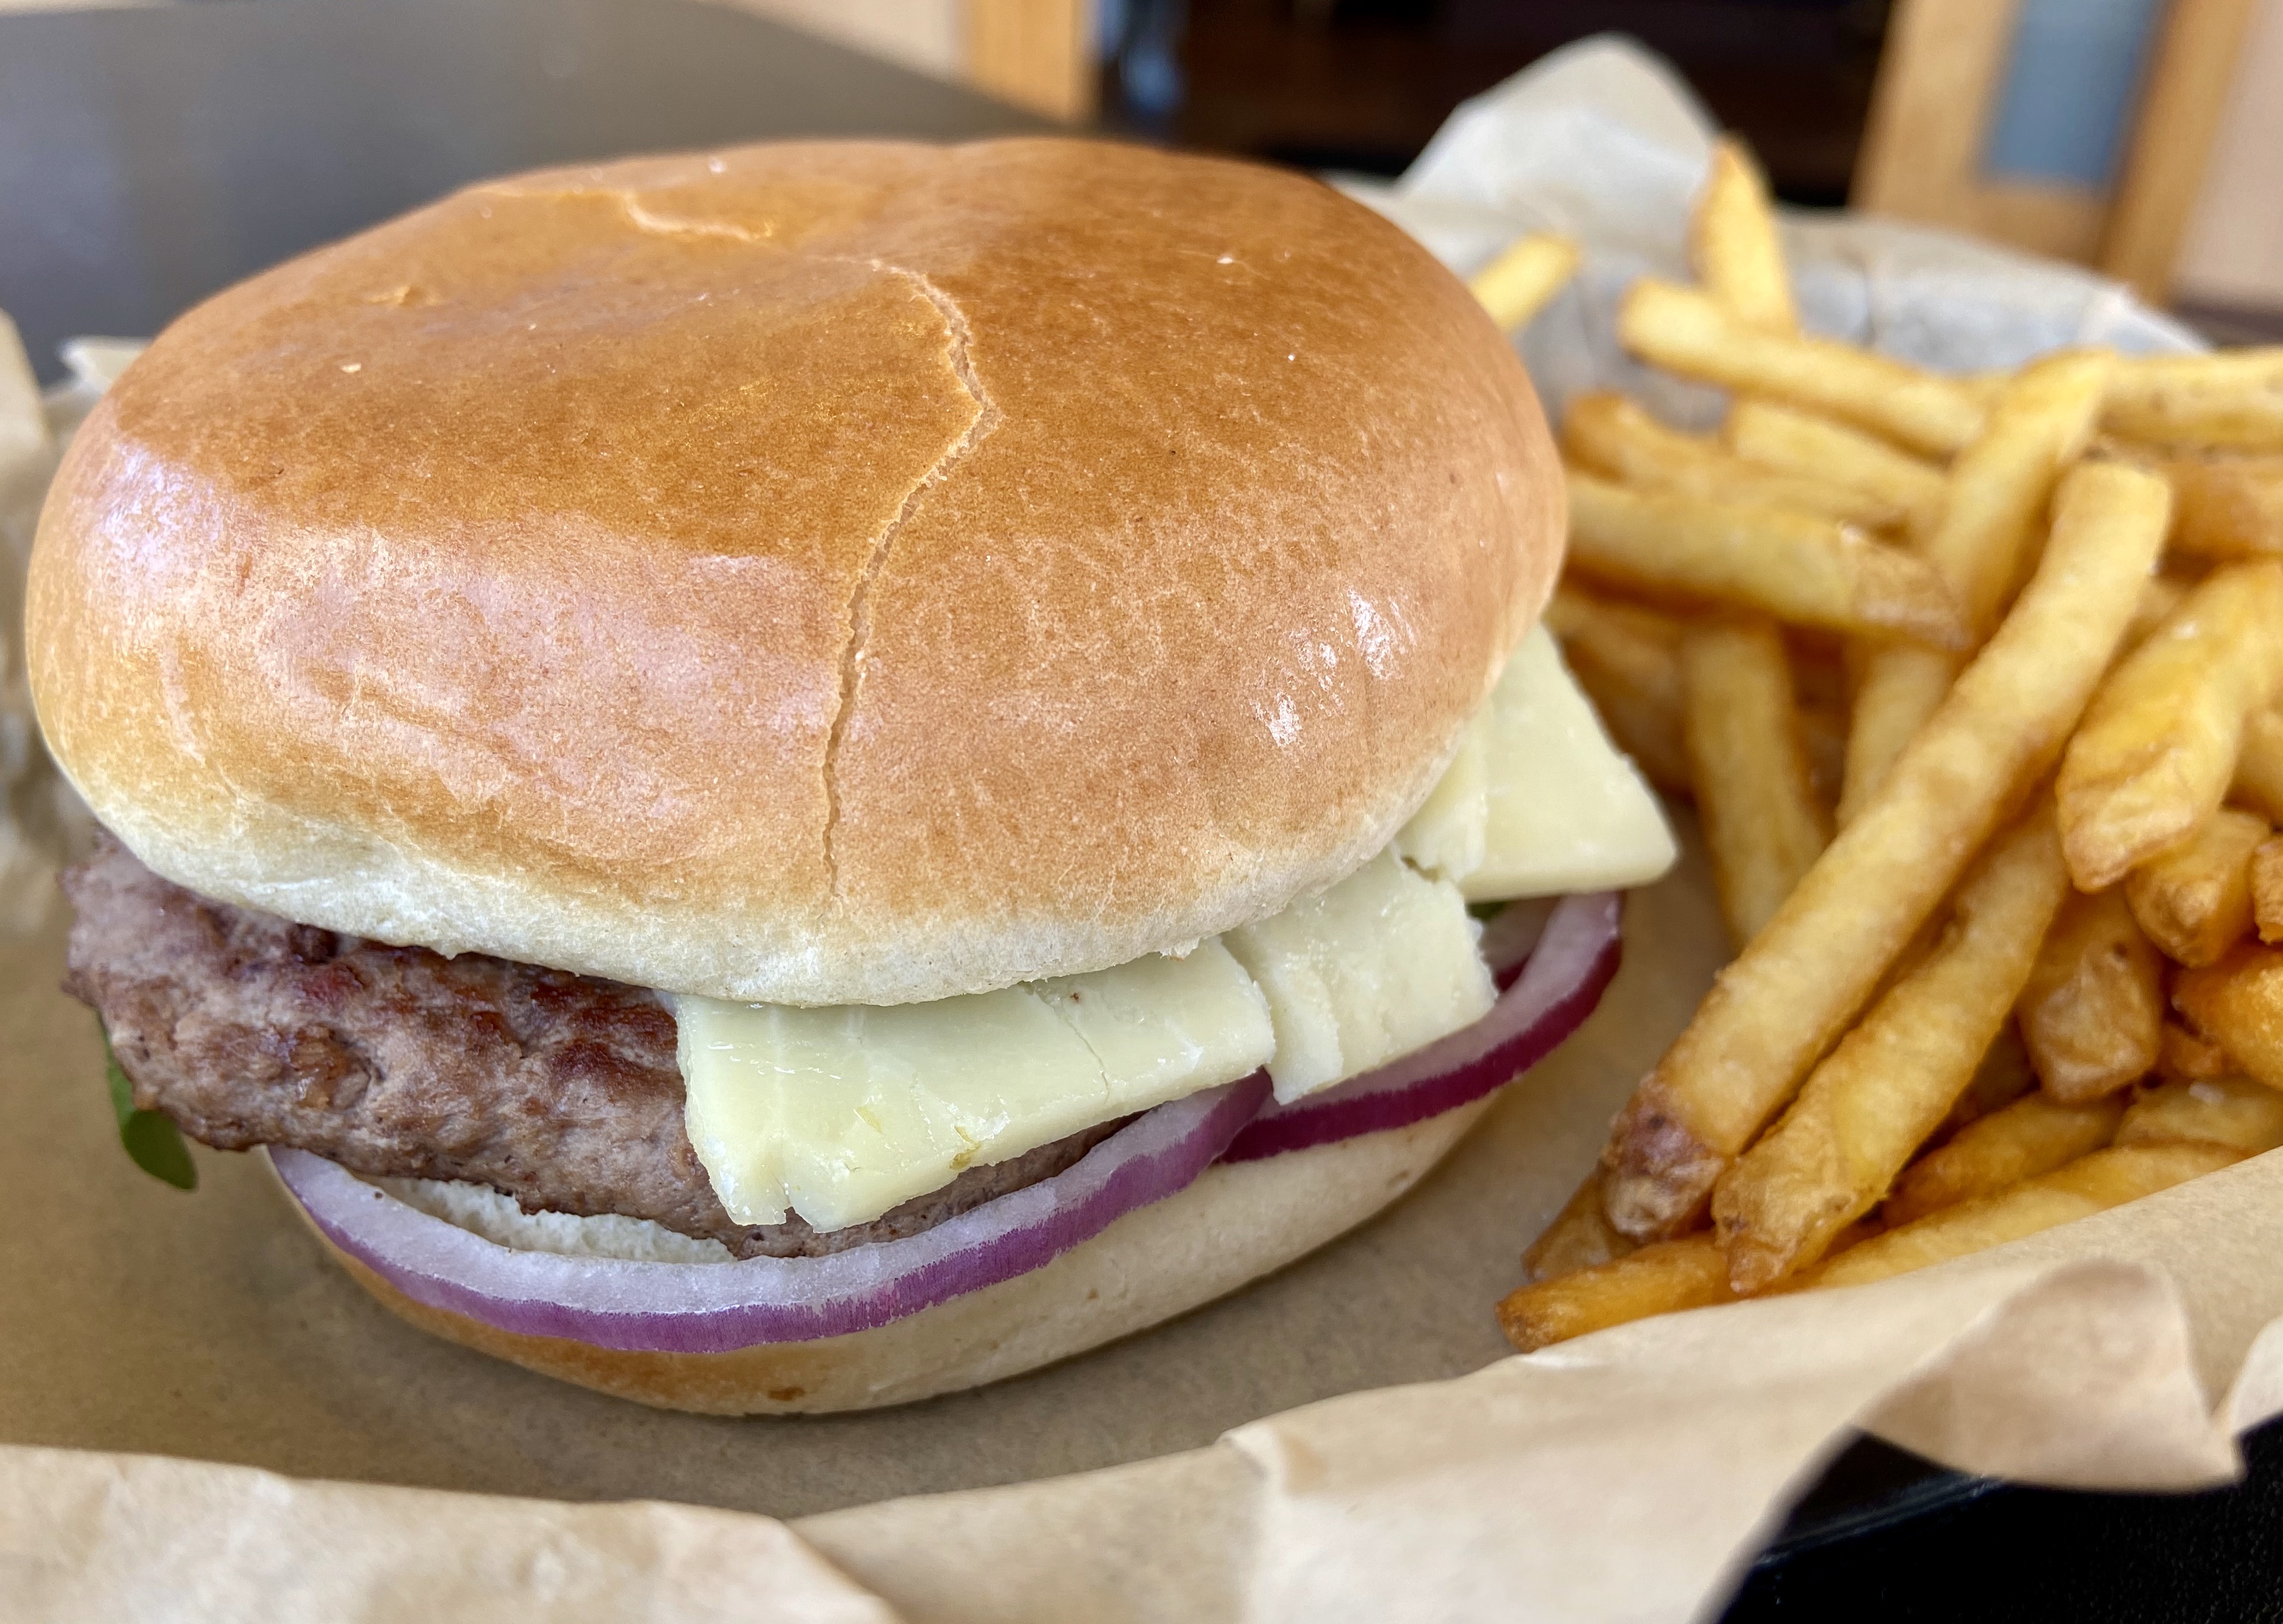 A Hopyard Cheddar Burger made with Rogue Creamery Cheddar and Rogue Farms' Freedom Hop Petals with a side of fries at Burgerville.